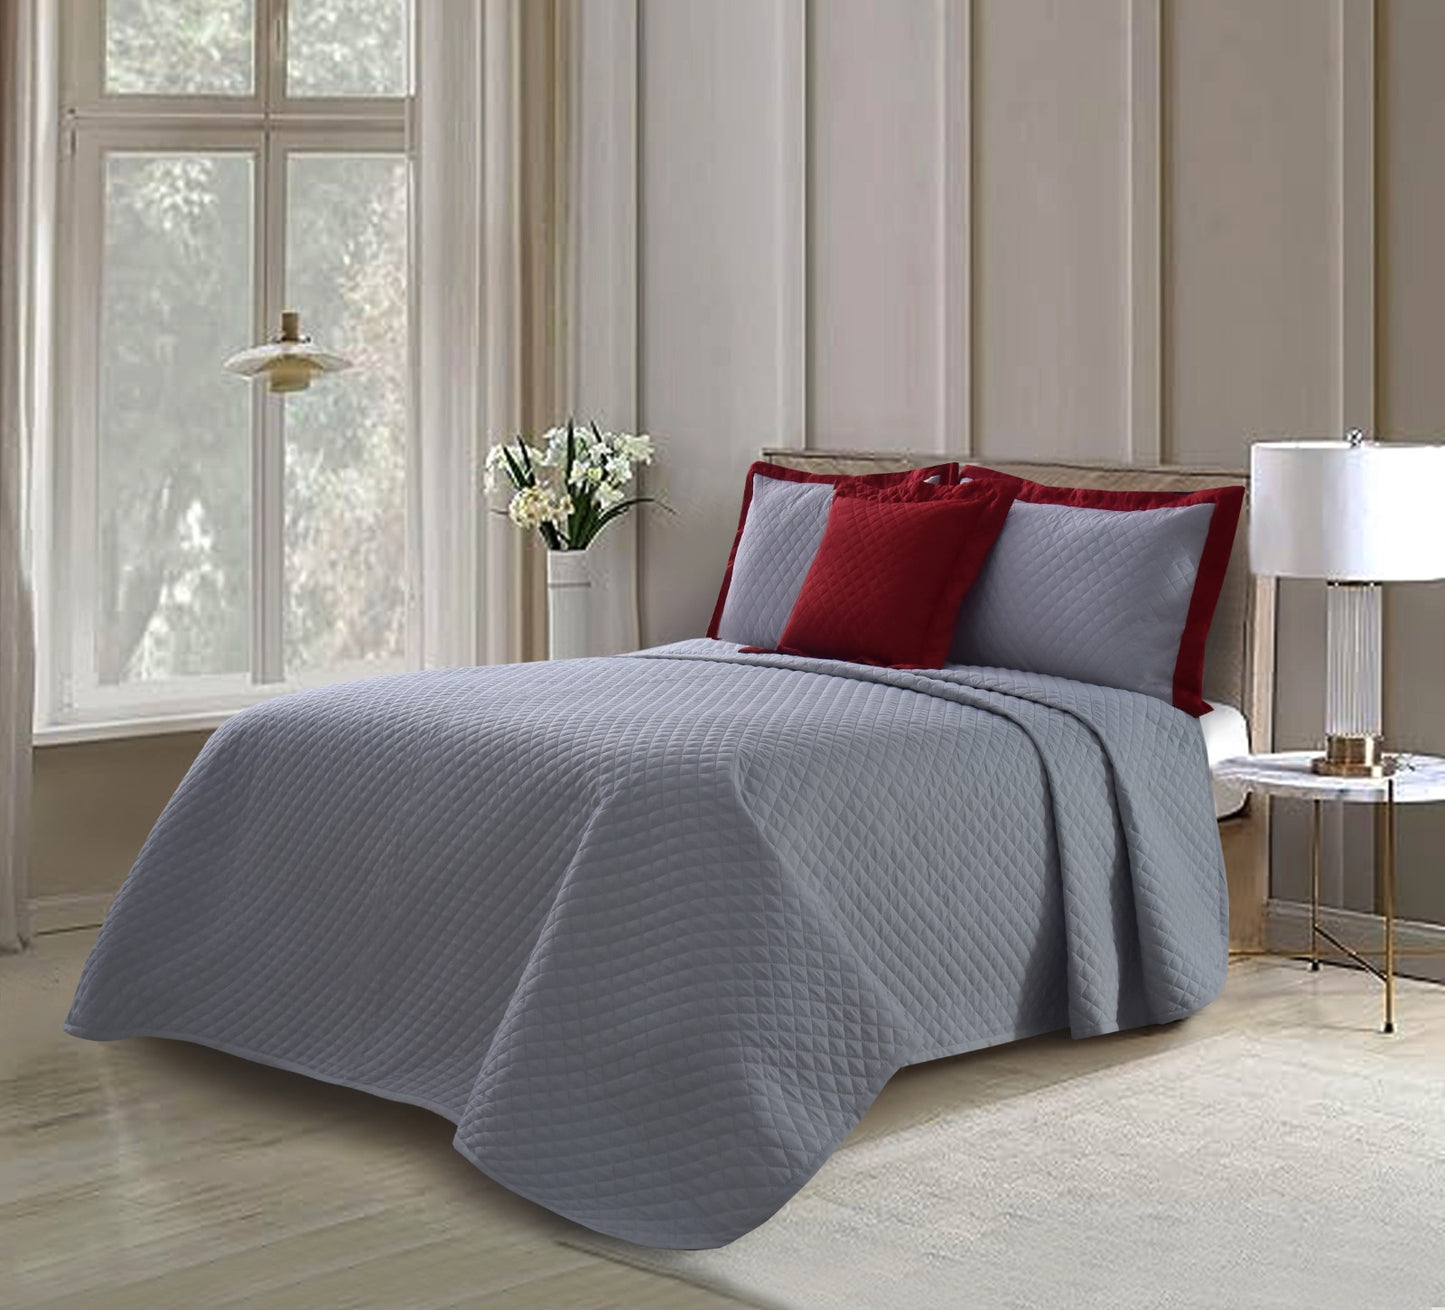 4 PCs Ultrasonic Quilted Luxury Bed Spread Set-Silver Over Maroon Apricot